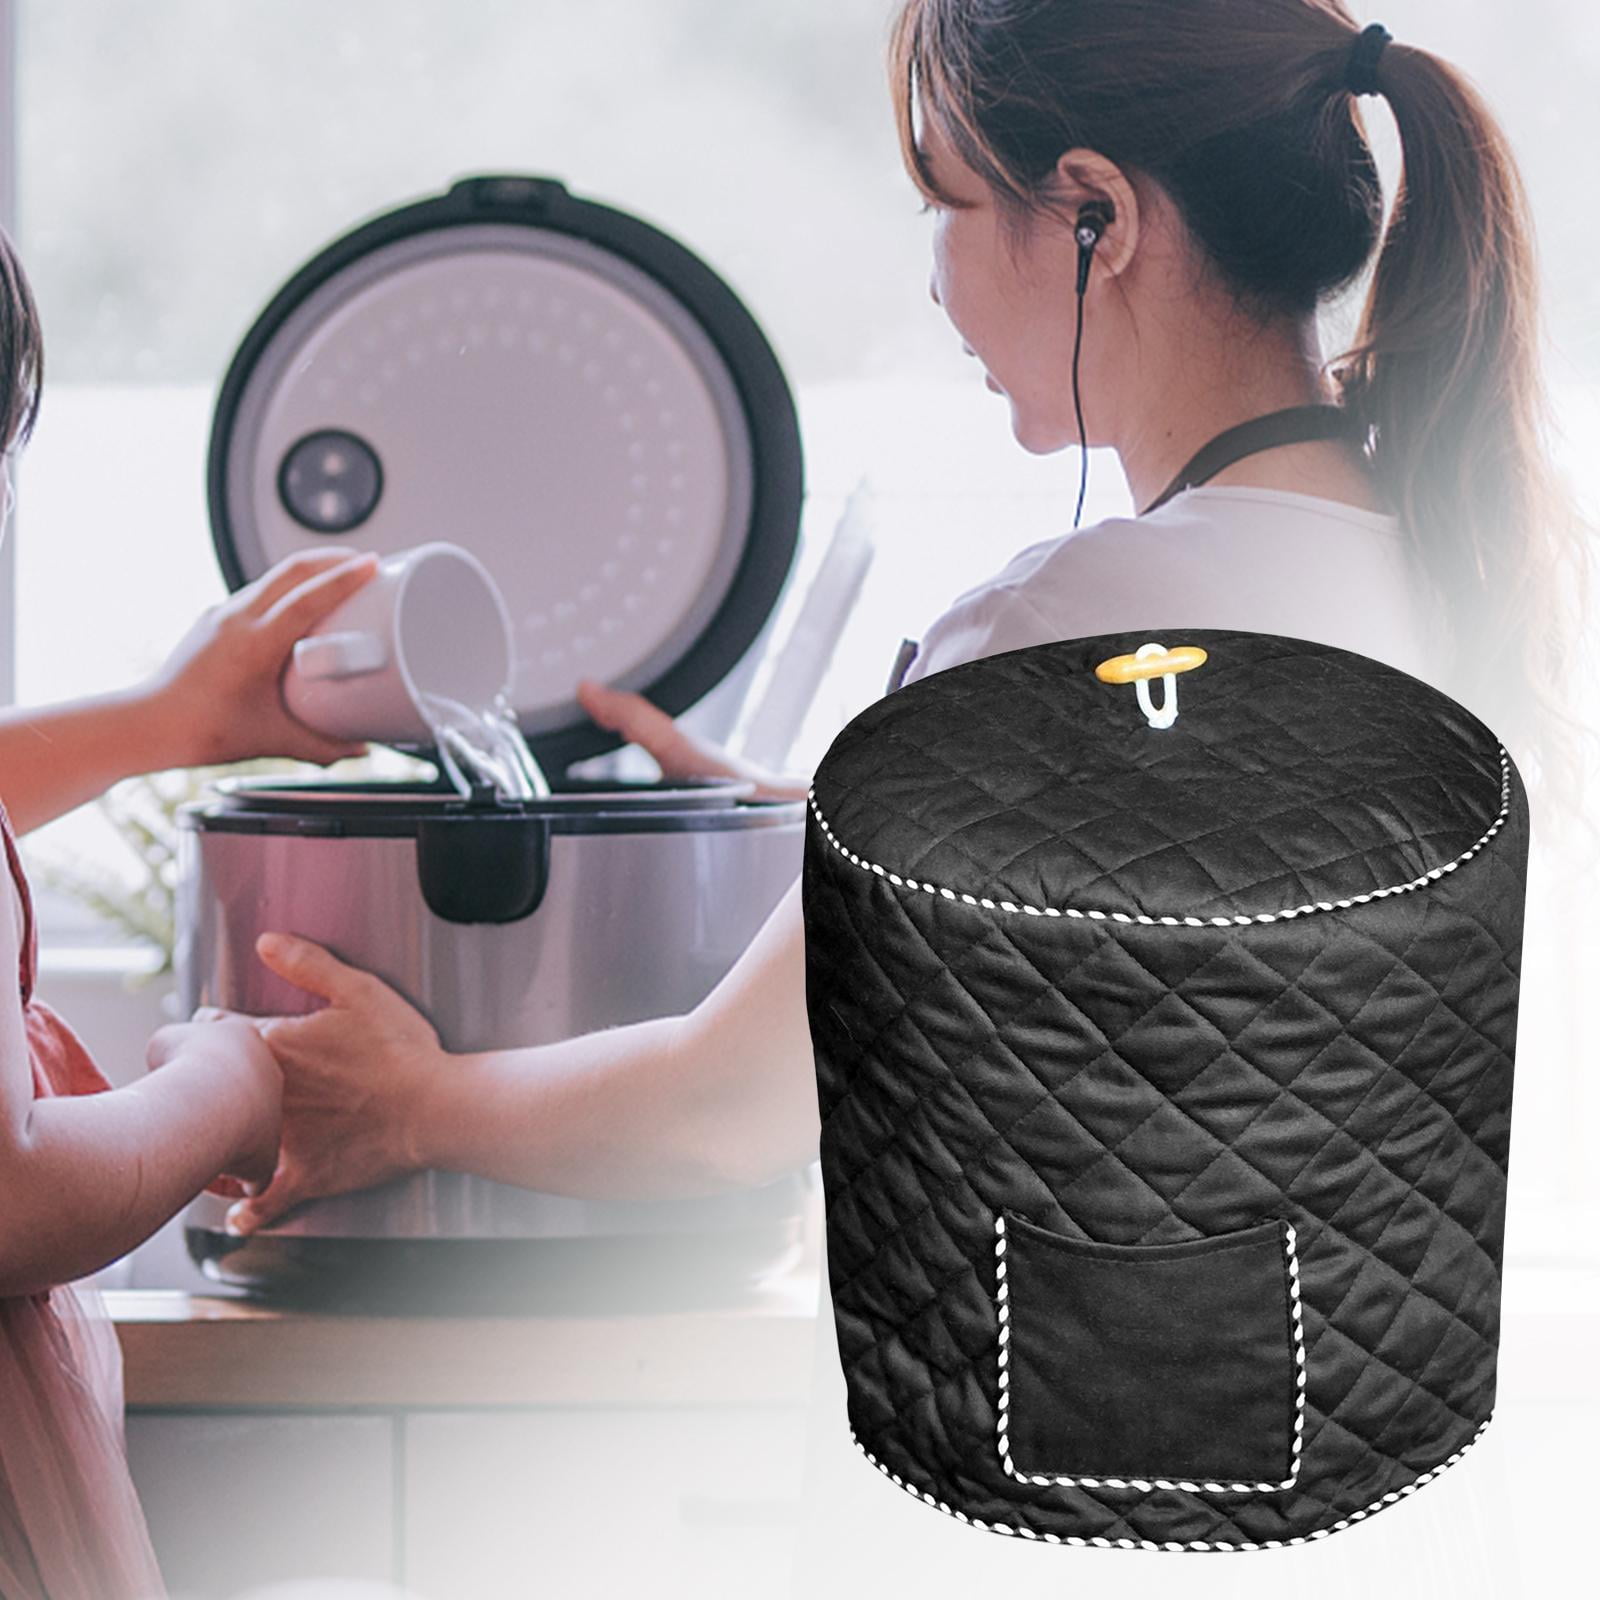 Dust Cover For Air Fryer, Air Fryer Cover With Storage Pockets